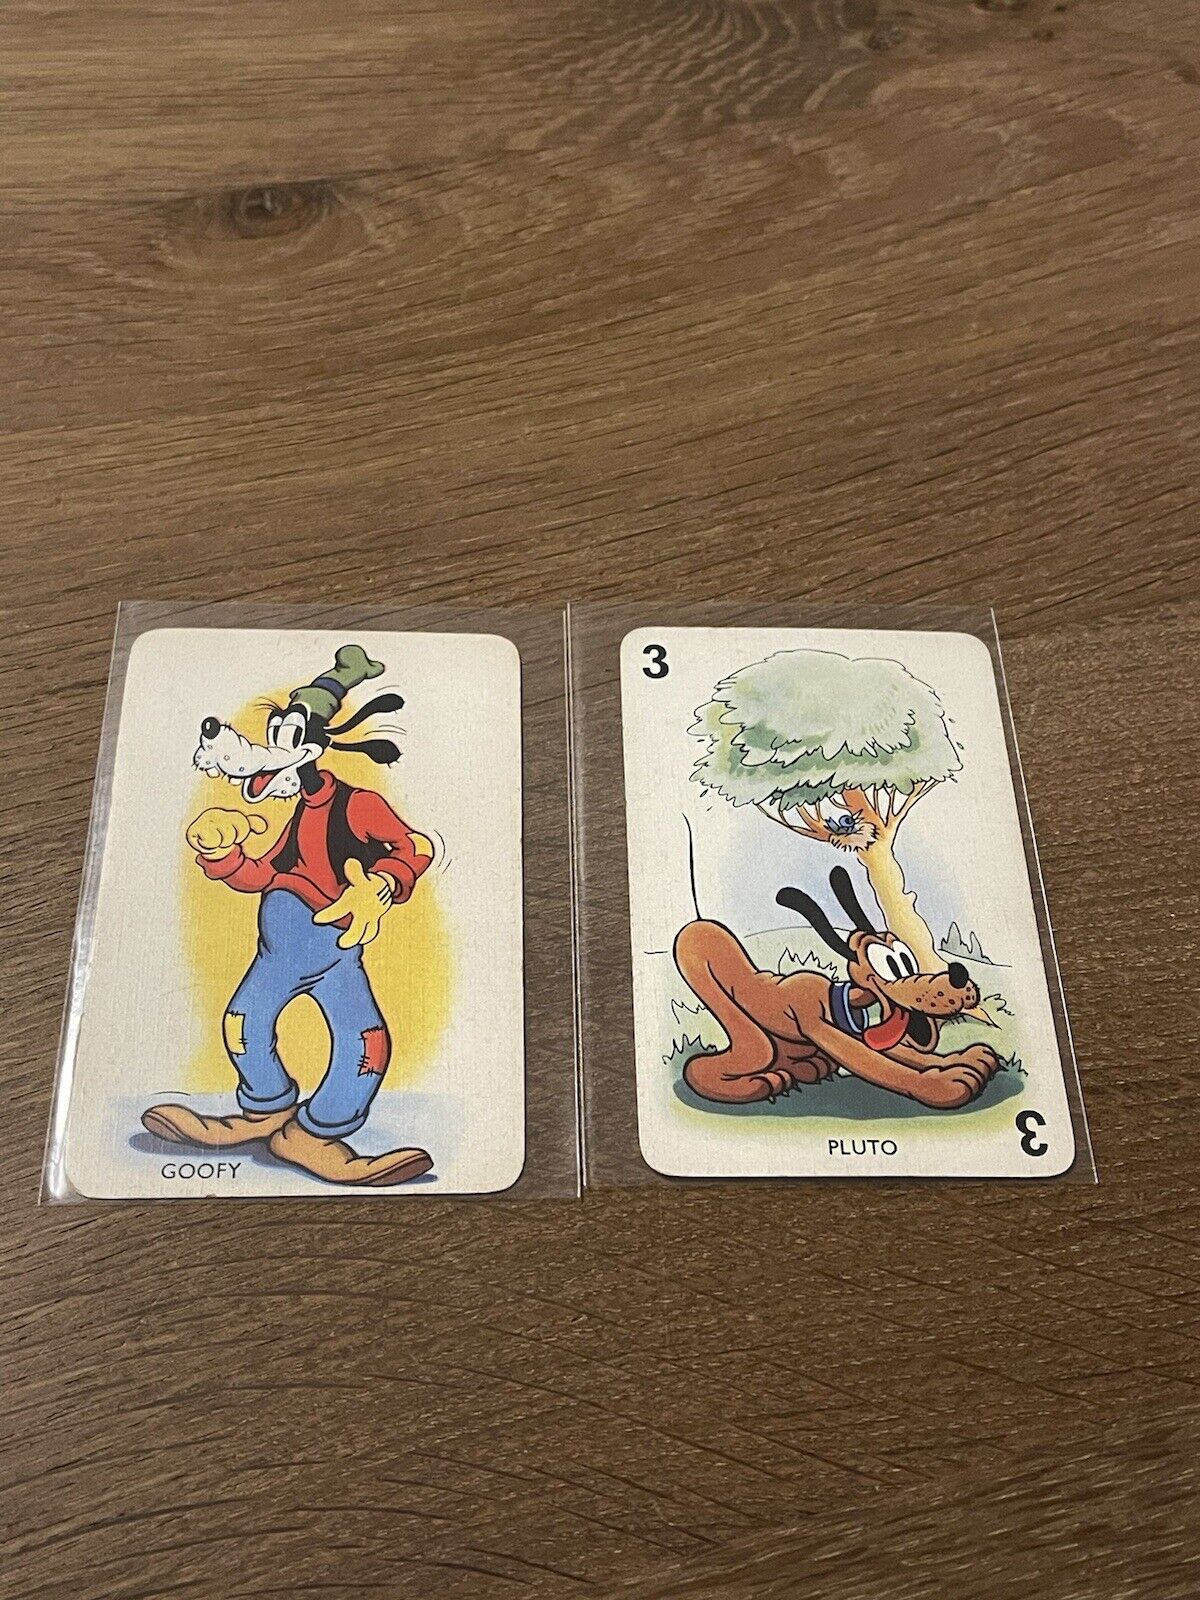 EXTREMELY RARE 1938 CASTELL BROS. LTD. GOOFY & PLUTO SHUFFLED SYMPHONIES CARDS